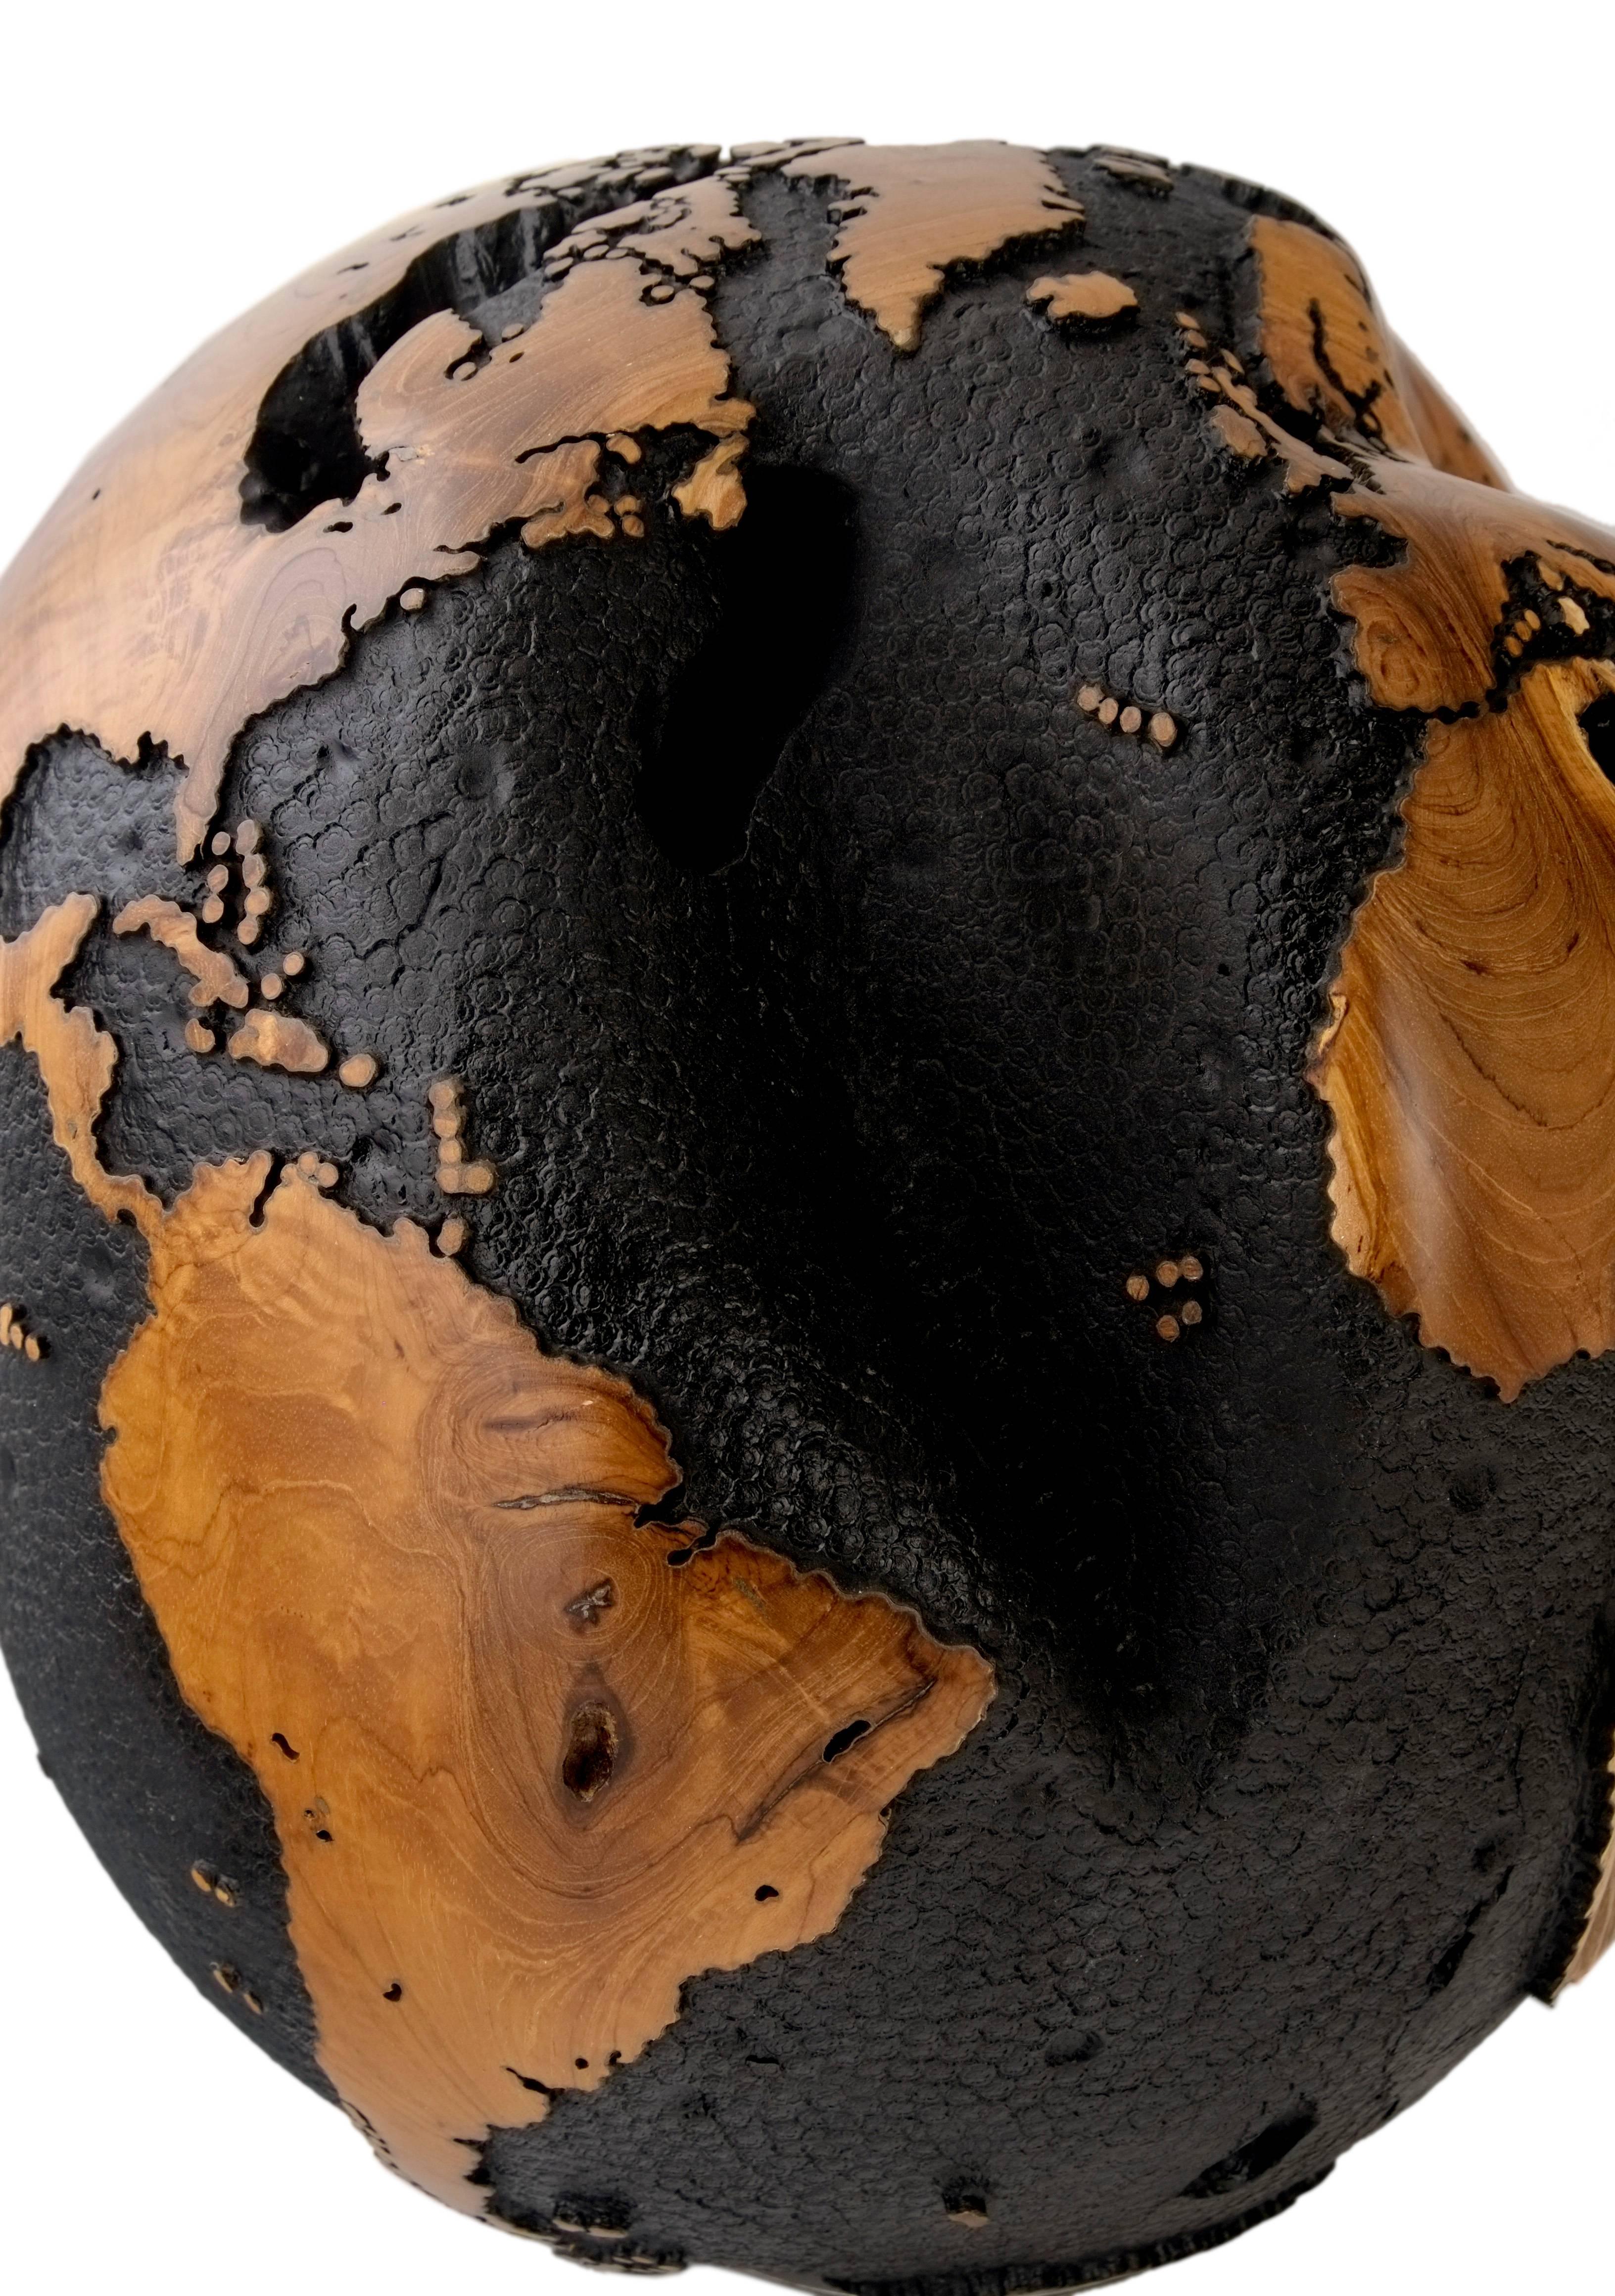 Contemporary Superb Black, Wooden Globe with Iron Layer, Black Paint, Hammered Finish, 30 cm